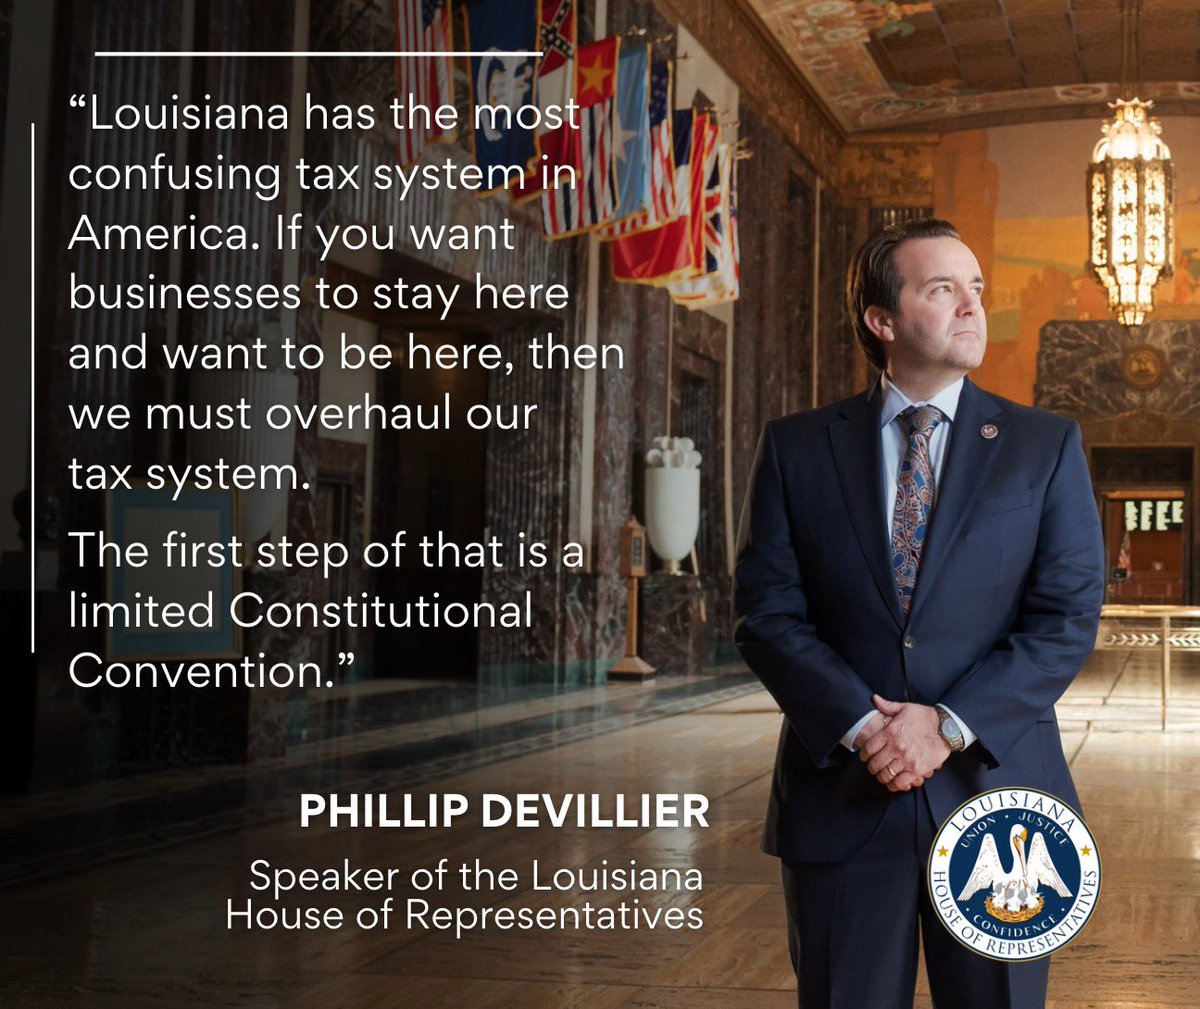 'Louisiana has the most confusing tax system in America. If you want businesses to stay here and want to be here, then we must overhaul our tax system. The first step of that is a limited Constitutional Convention.' #lalege